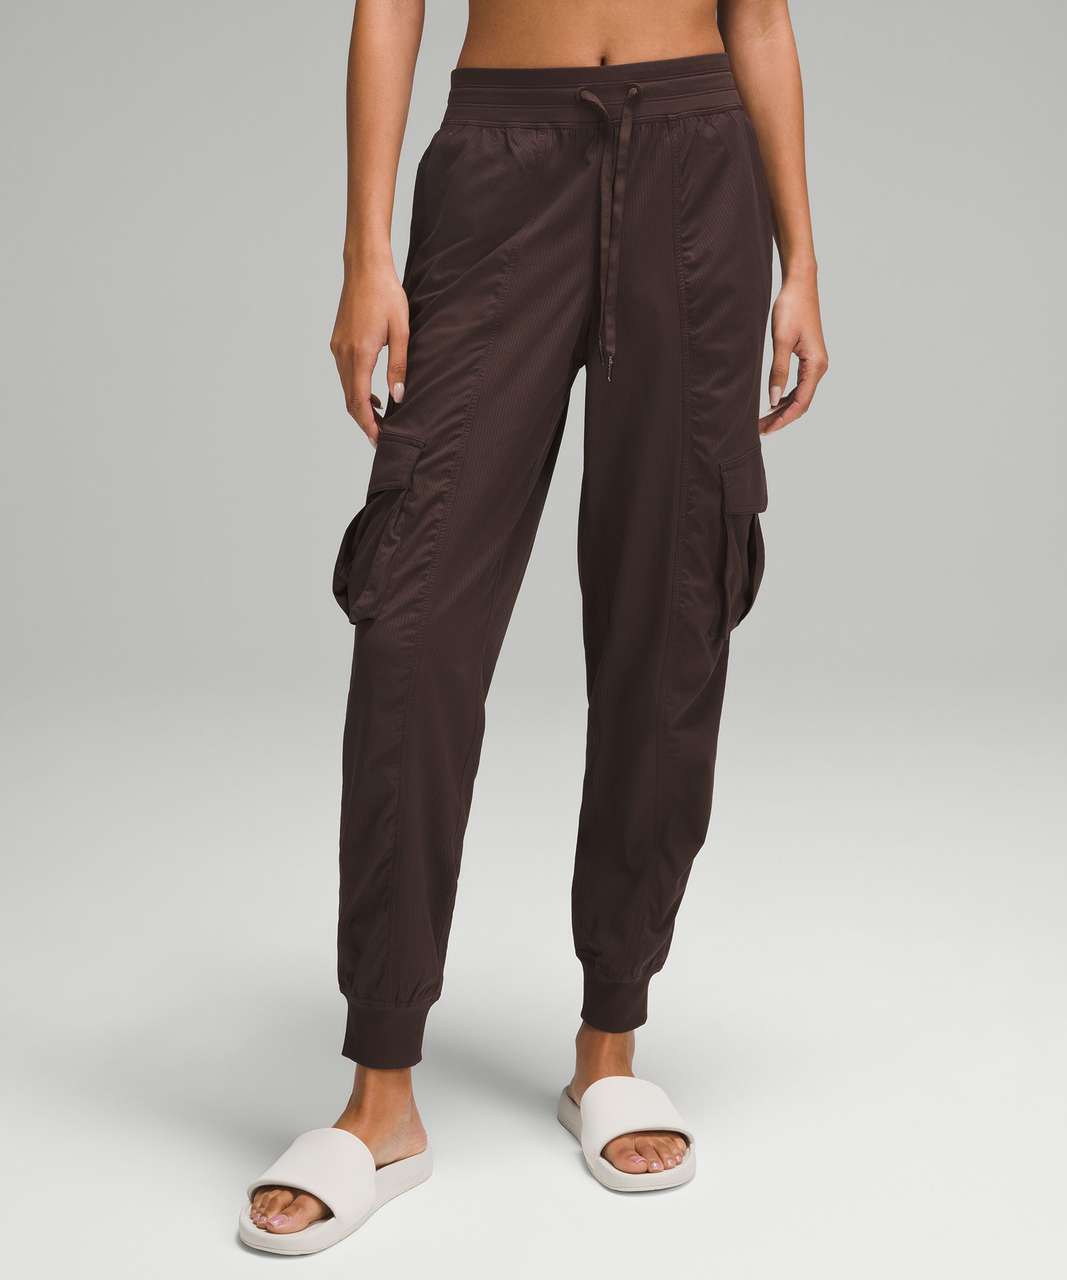 Lululemon Dance Studio Relaxed-Fit Mid-Rise Cargo Jogger - Espresso